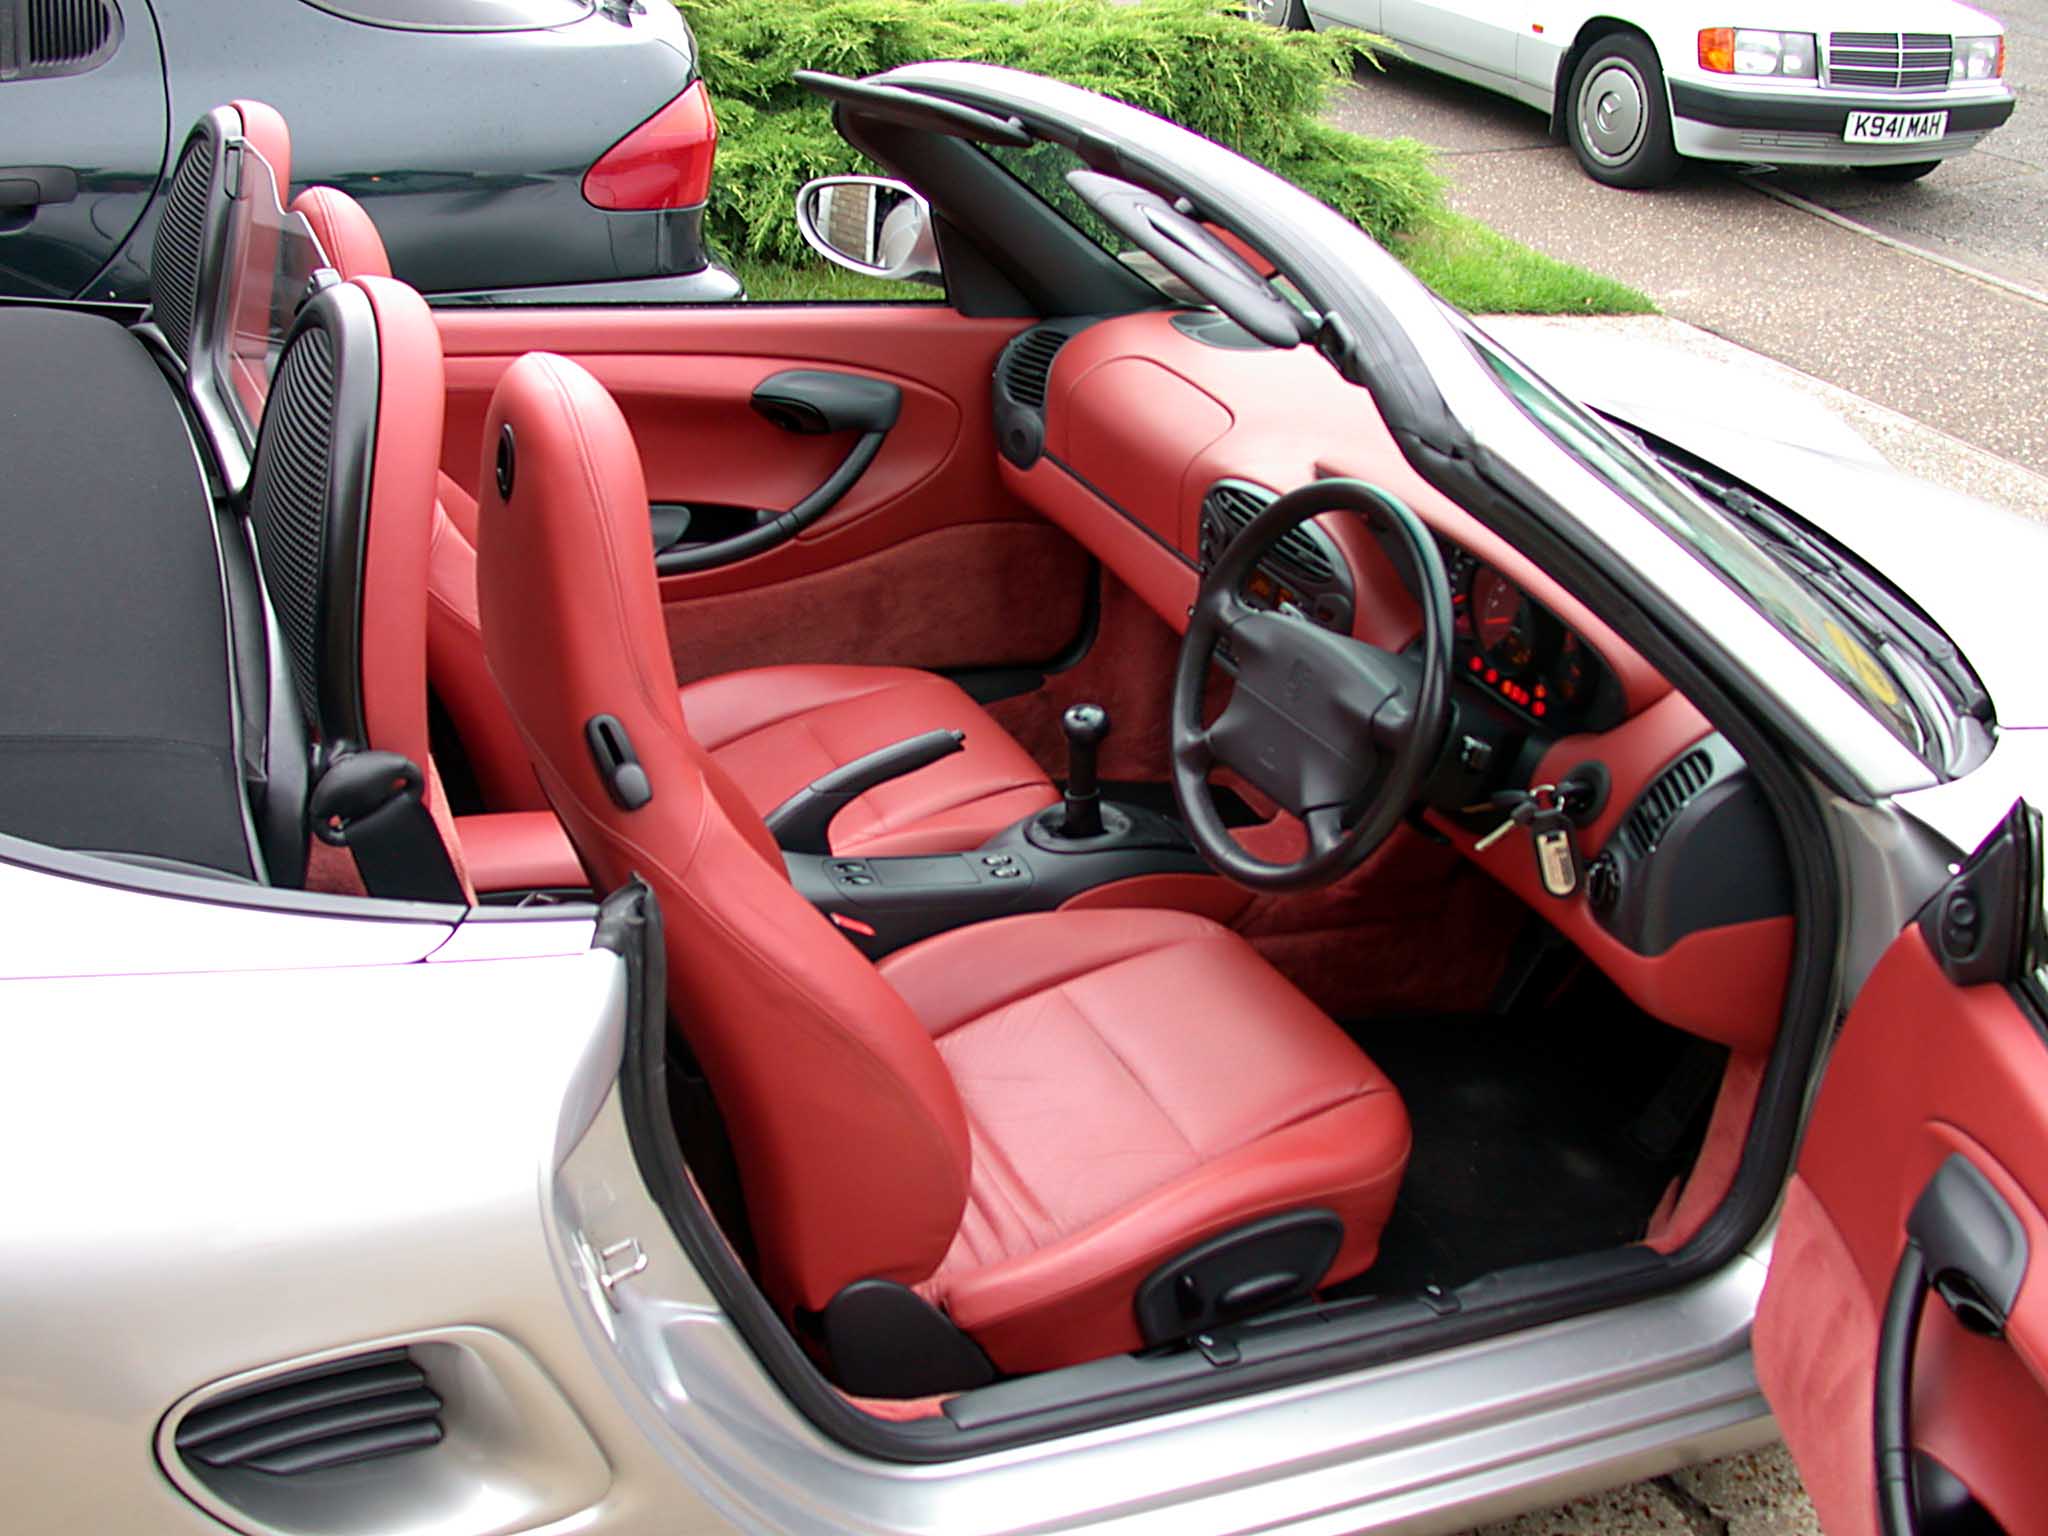 Porsche Boxster I (986) Restyling 2002 - 2004 Roadster #7